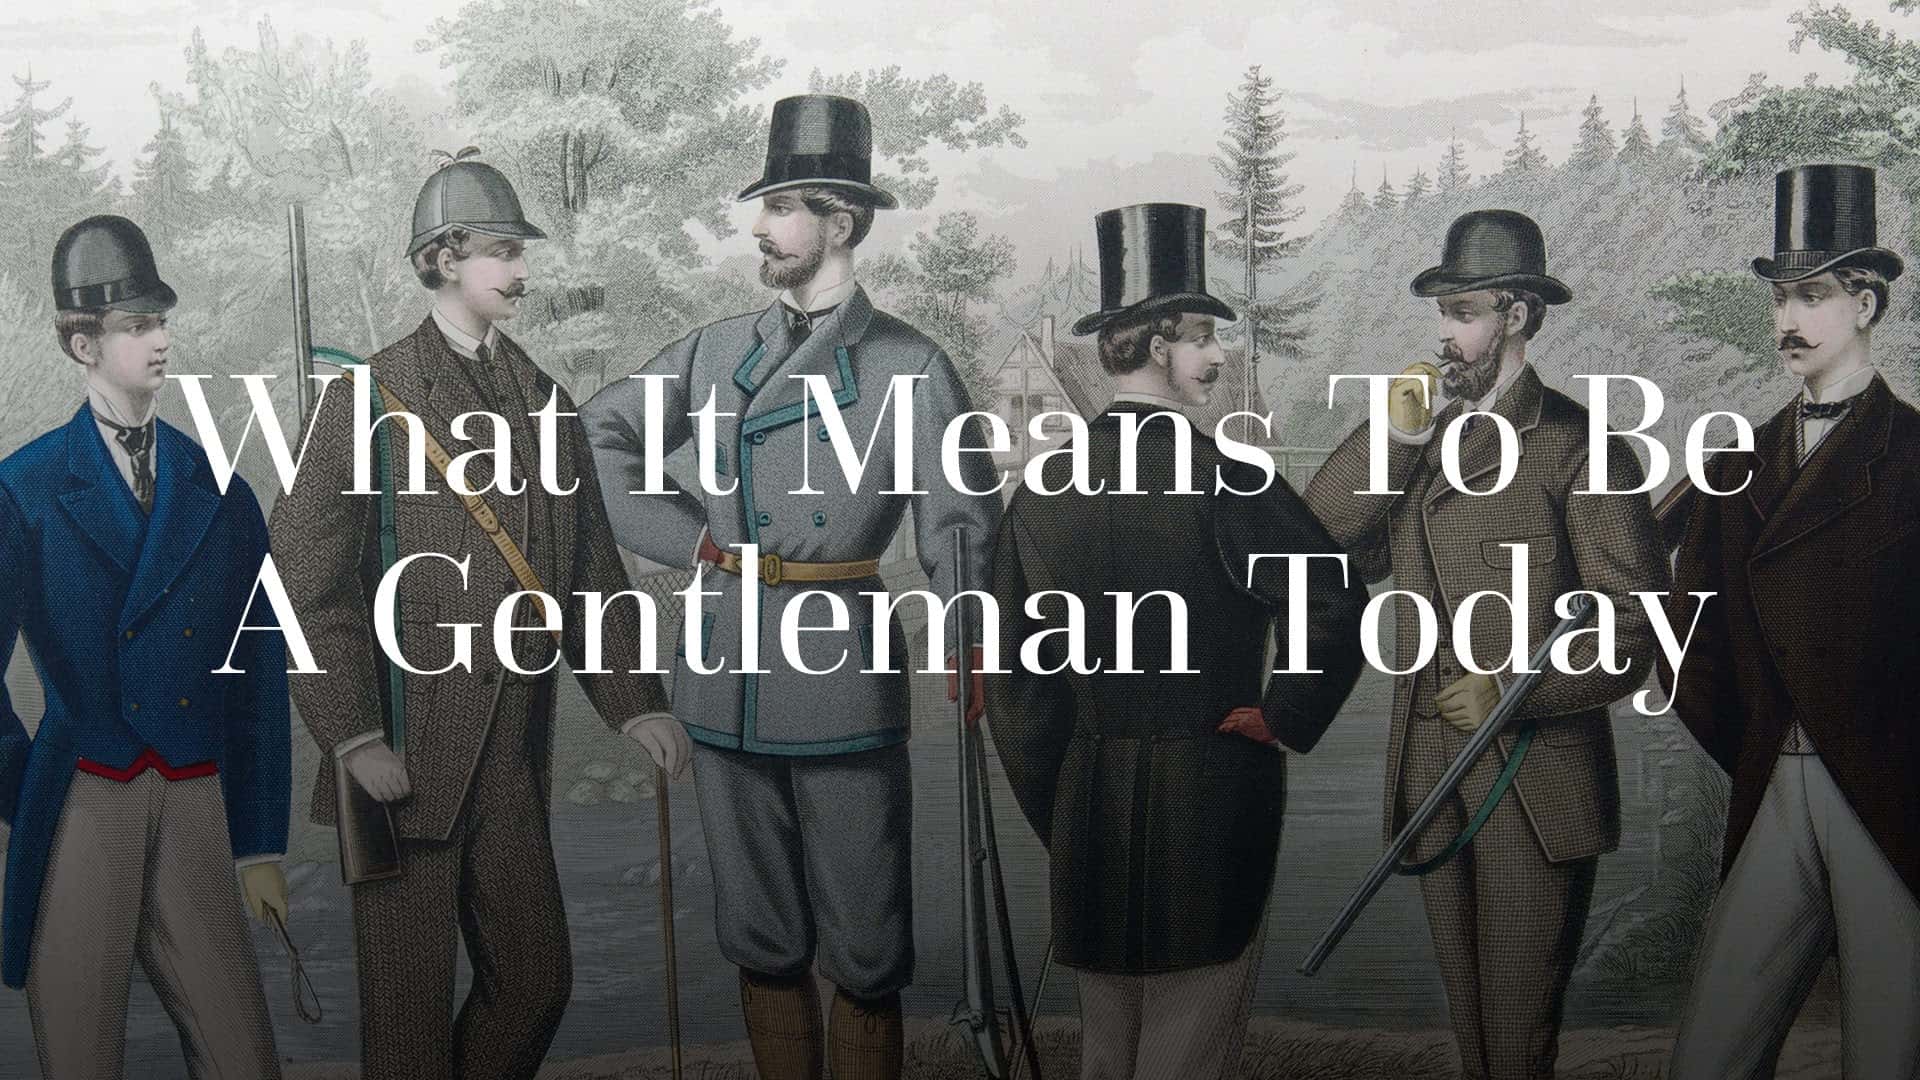 What it means to be a gentleman